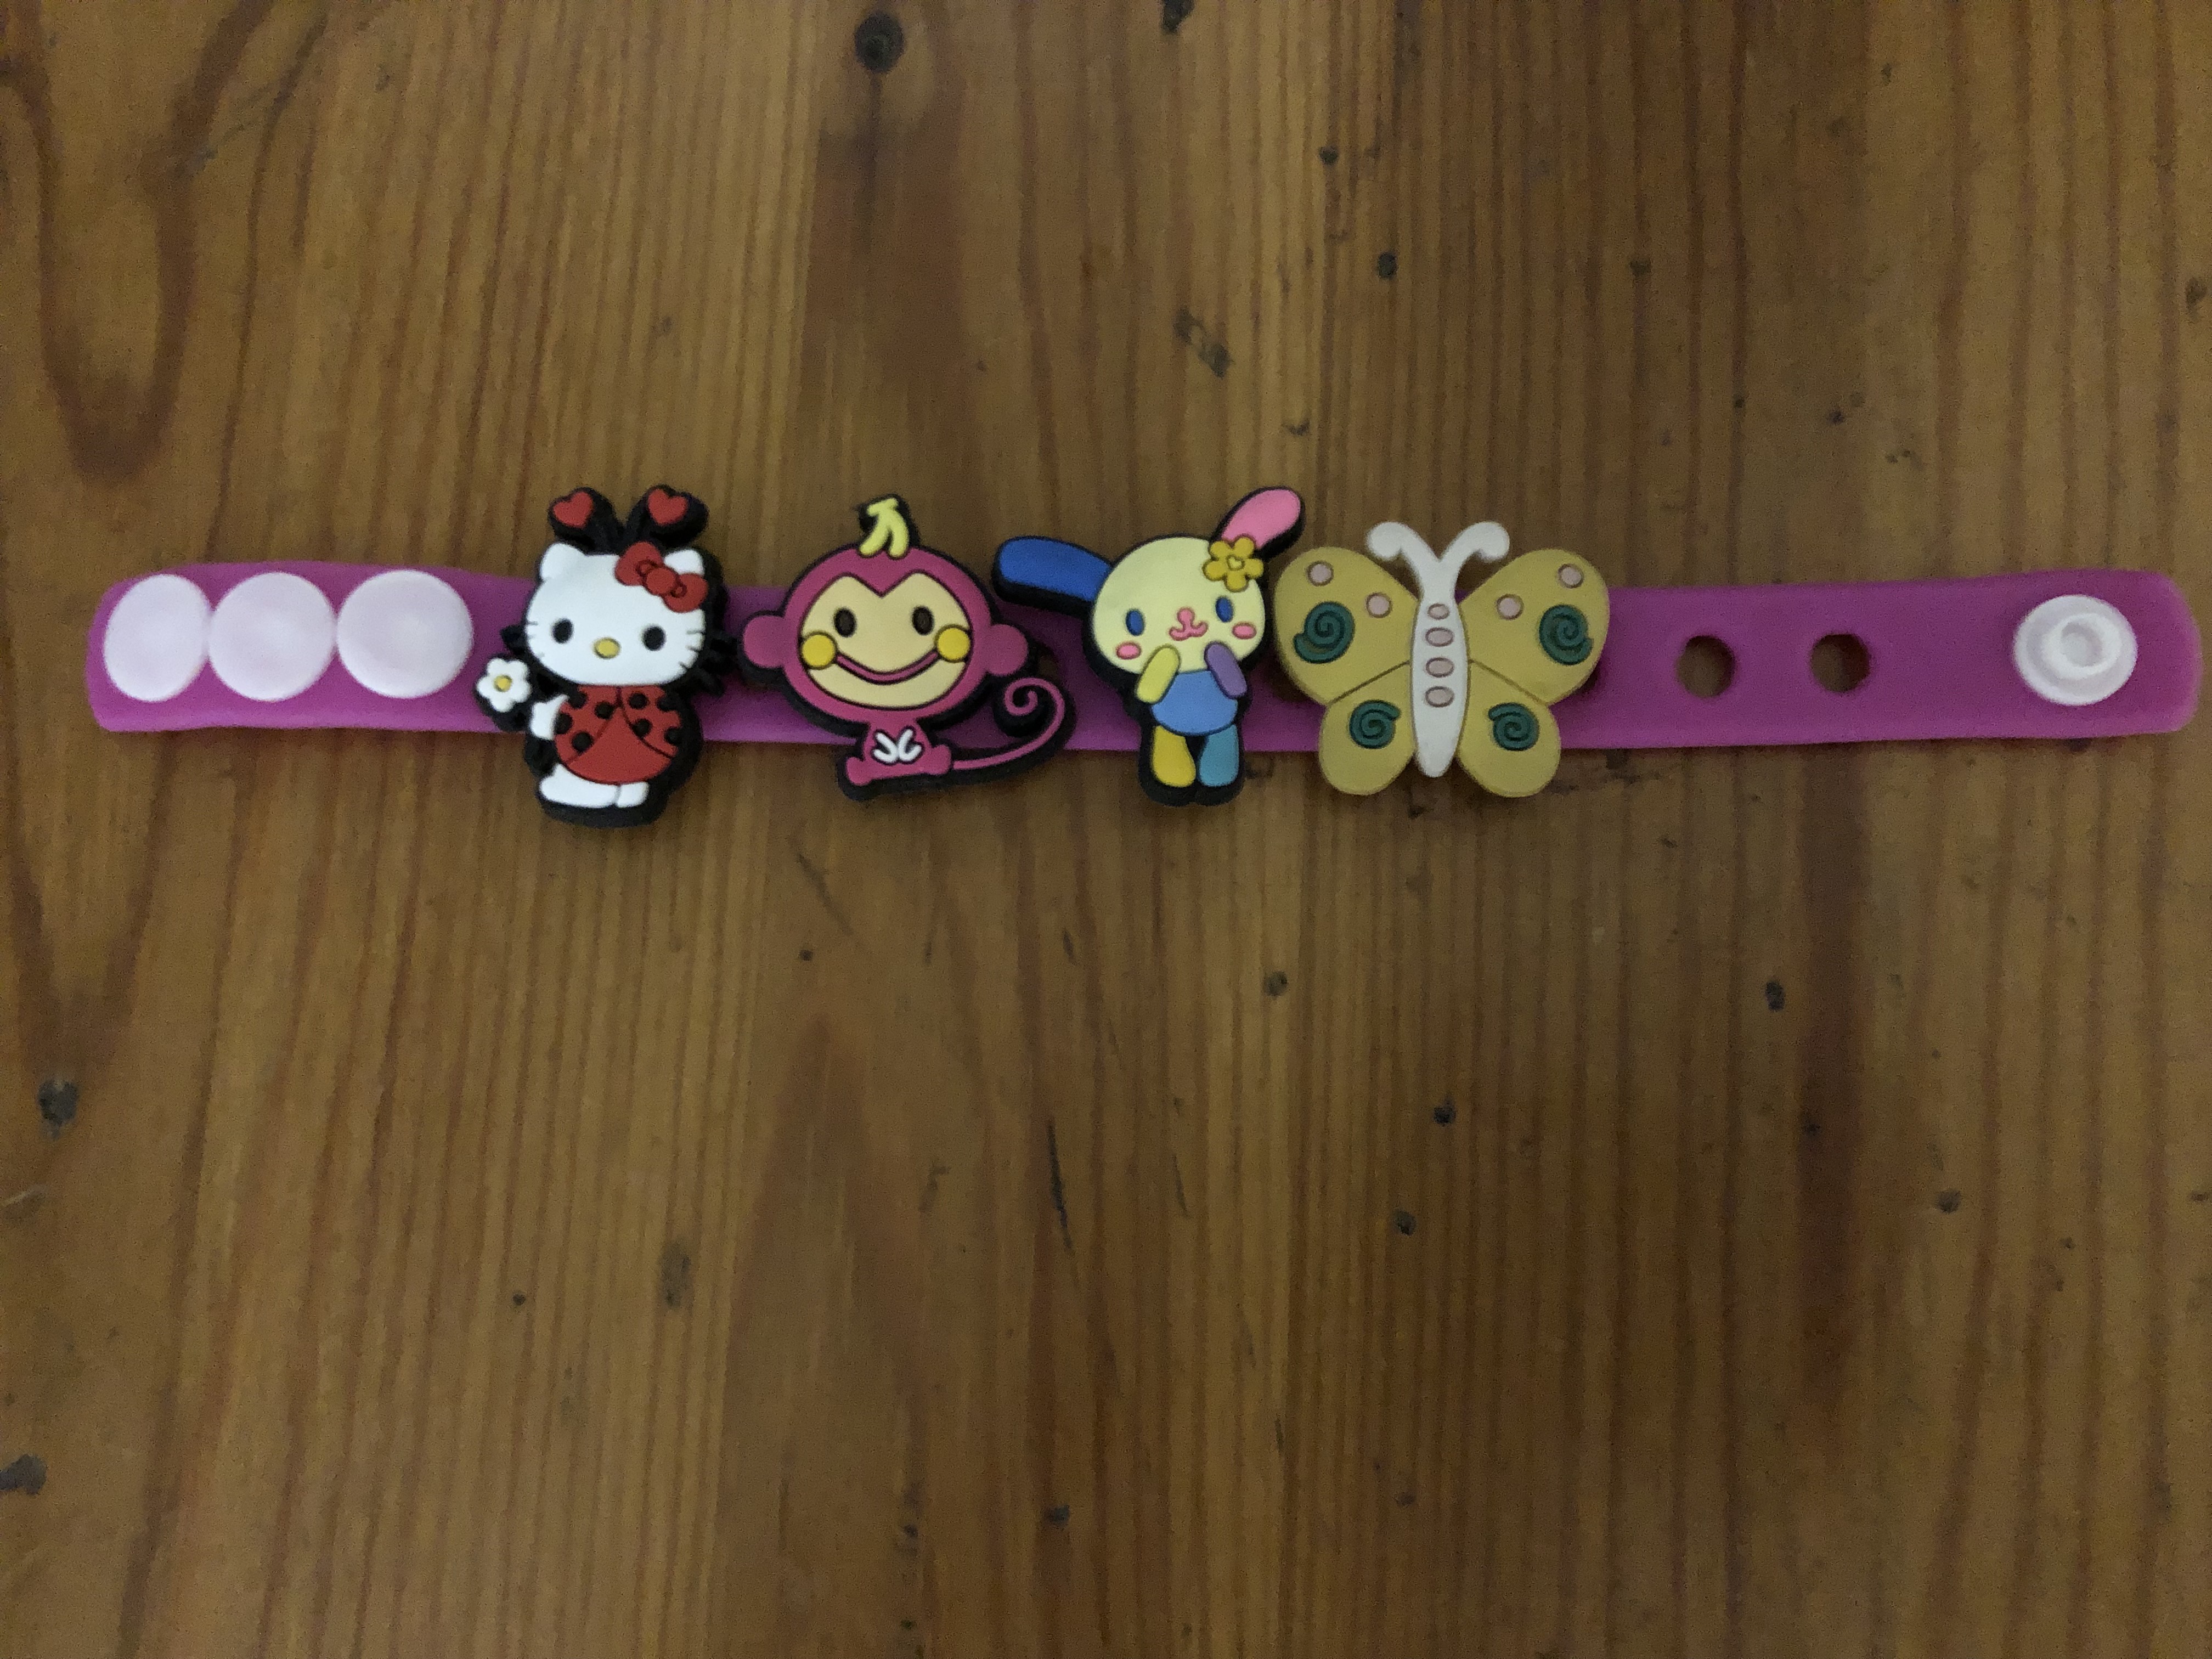 Minnie Mouse croc charms by Lalaloopsy2525 on DeviantArt